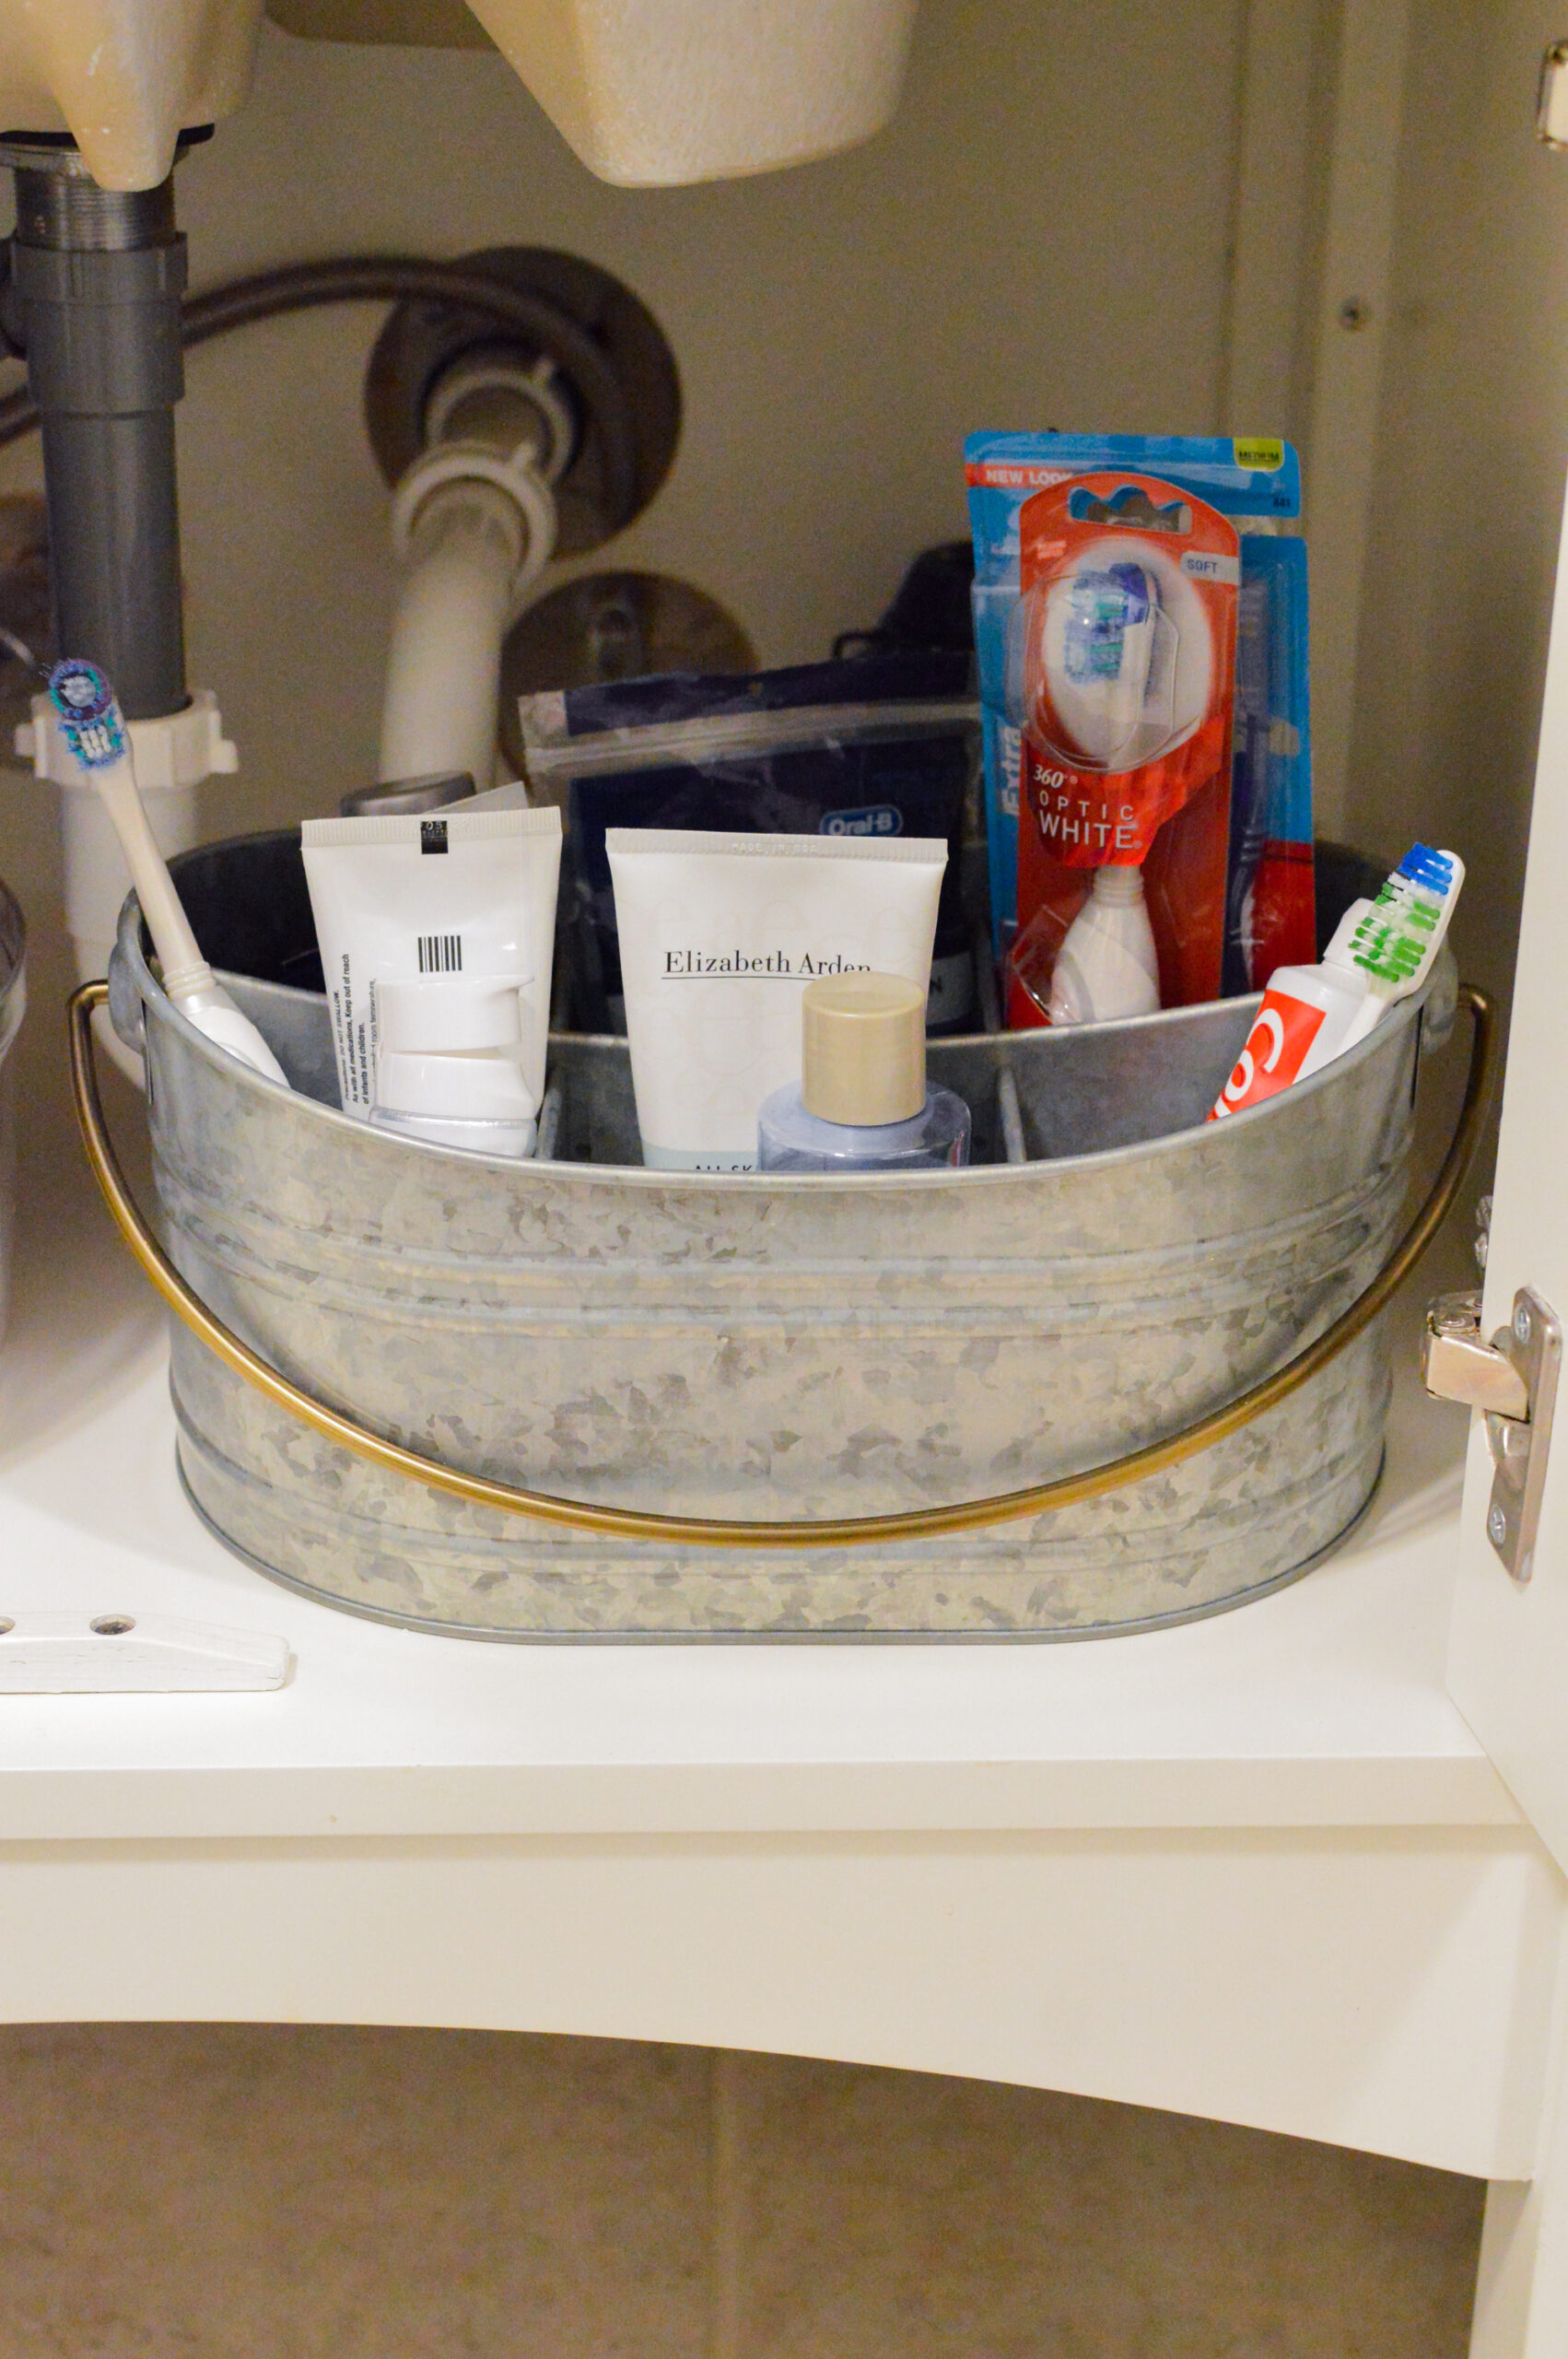 How To Organize Under The Bathroom Sink - Fox Hollow Cottage